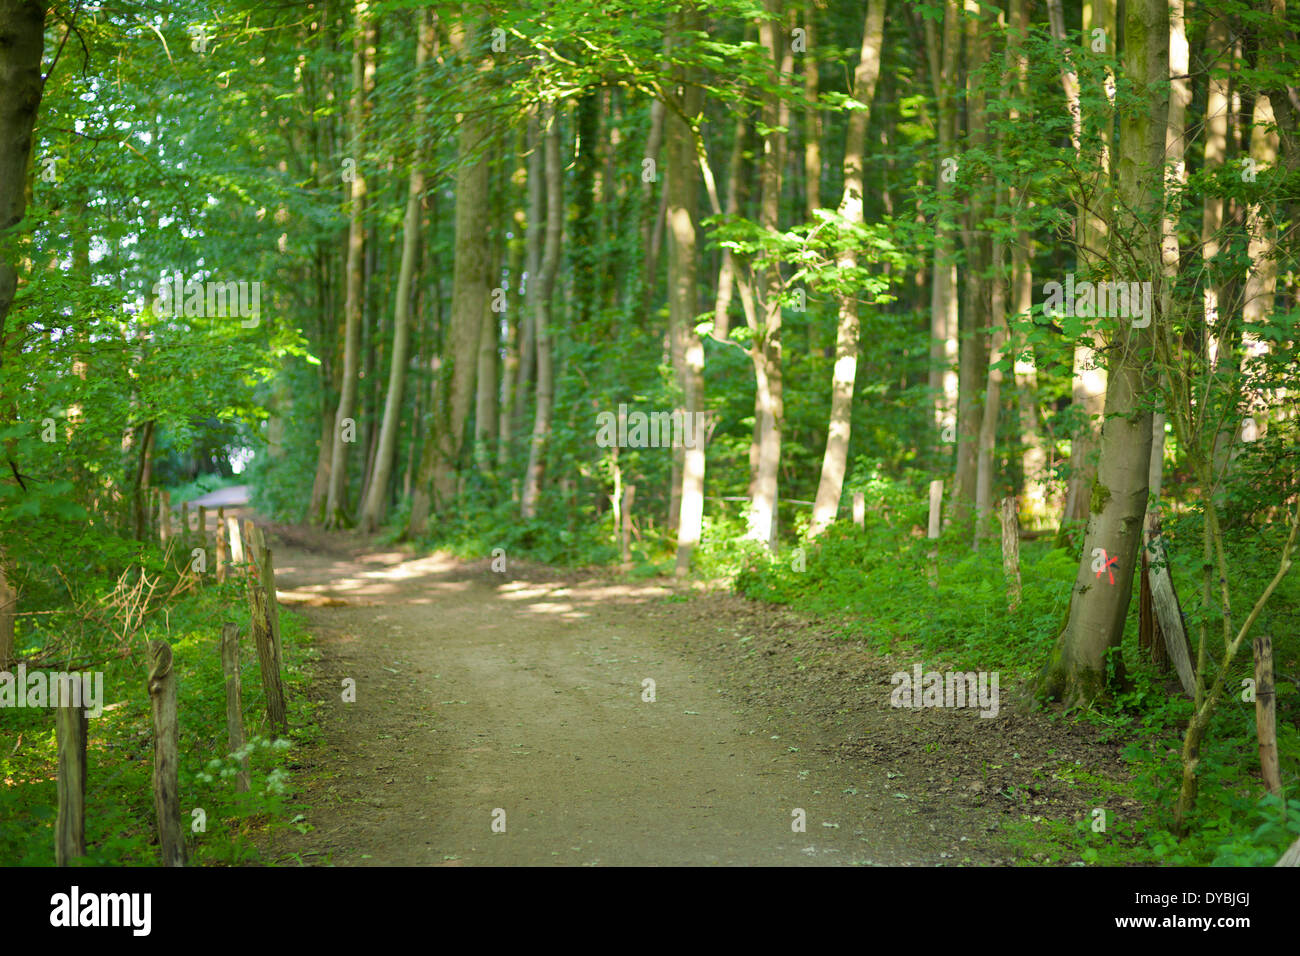 Dirt road leading through light forest. Stock Photo